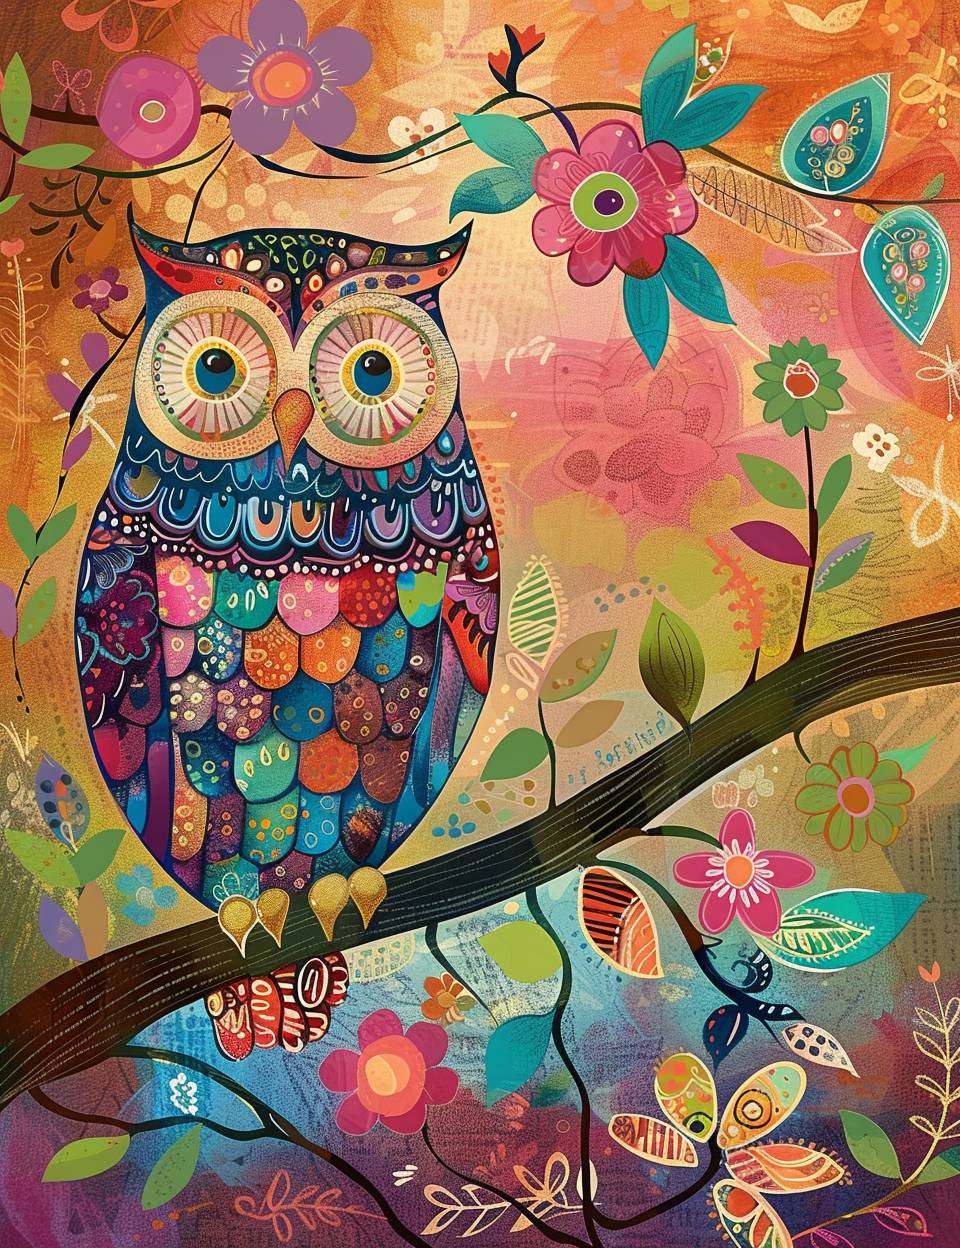 Create a whimsical illustration featuring a cartoonish owl on a colorful background, in the style of the vibrant, fairy-tale-like and children’s book illustrations. The medium should combine illustration with ephemera and doodle art elements. Use a color palette of warm tones--pinks, oranges, teals, and purples--with pops of bright floral hues. The art should have a playful, dreamlike quality, rich in patterns and fantasy motifs, capturing an enchanting, storybook essence and ephemera background.